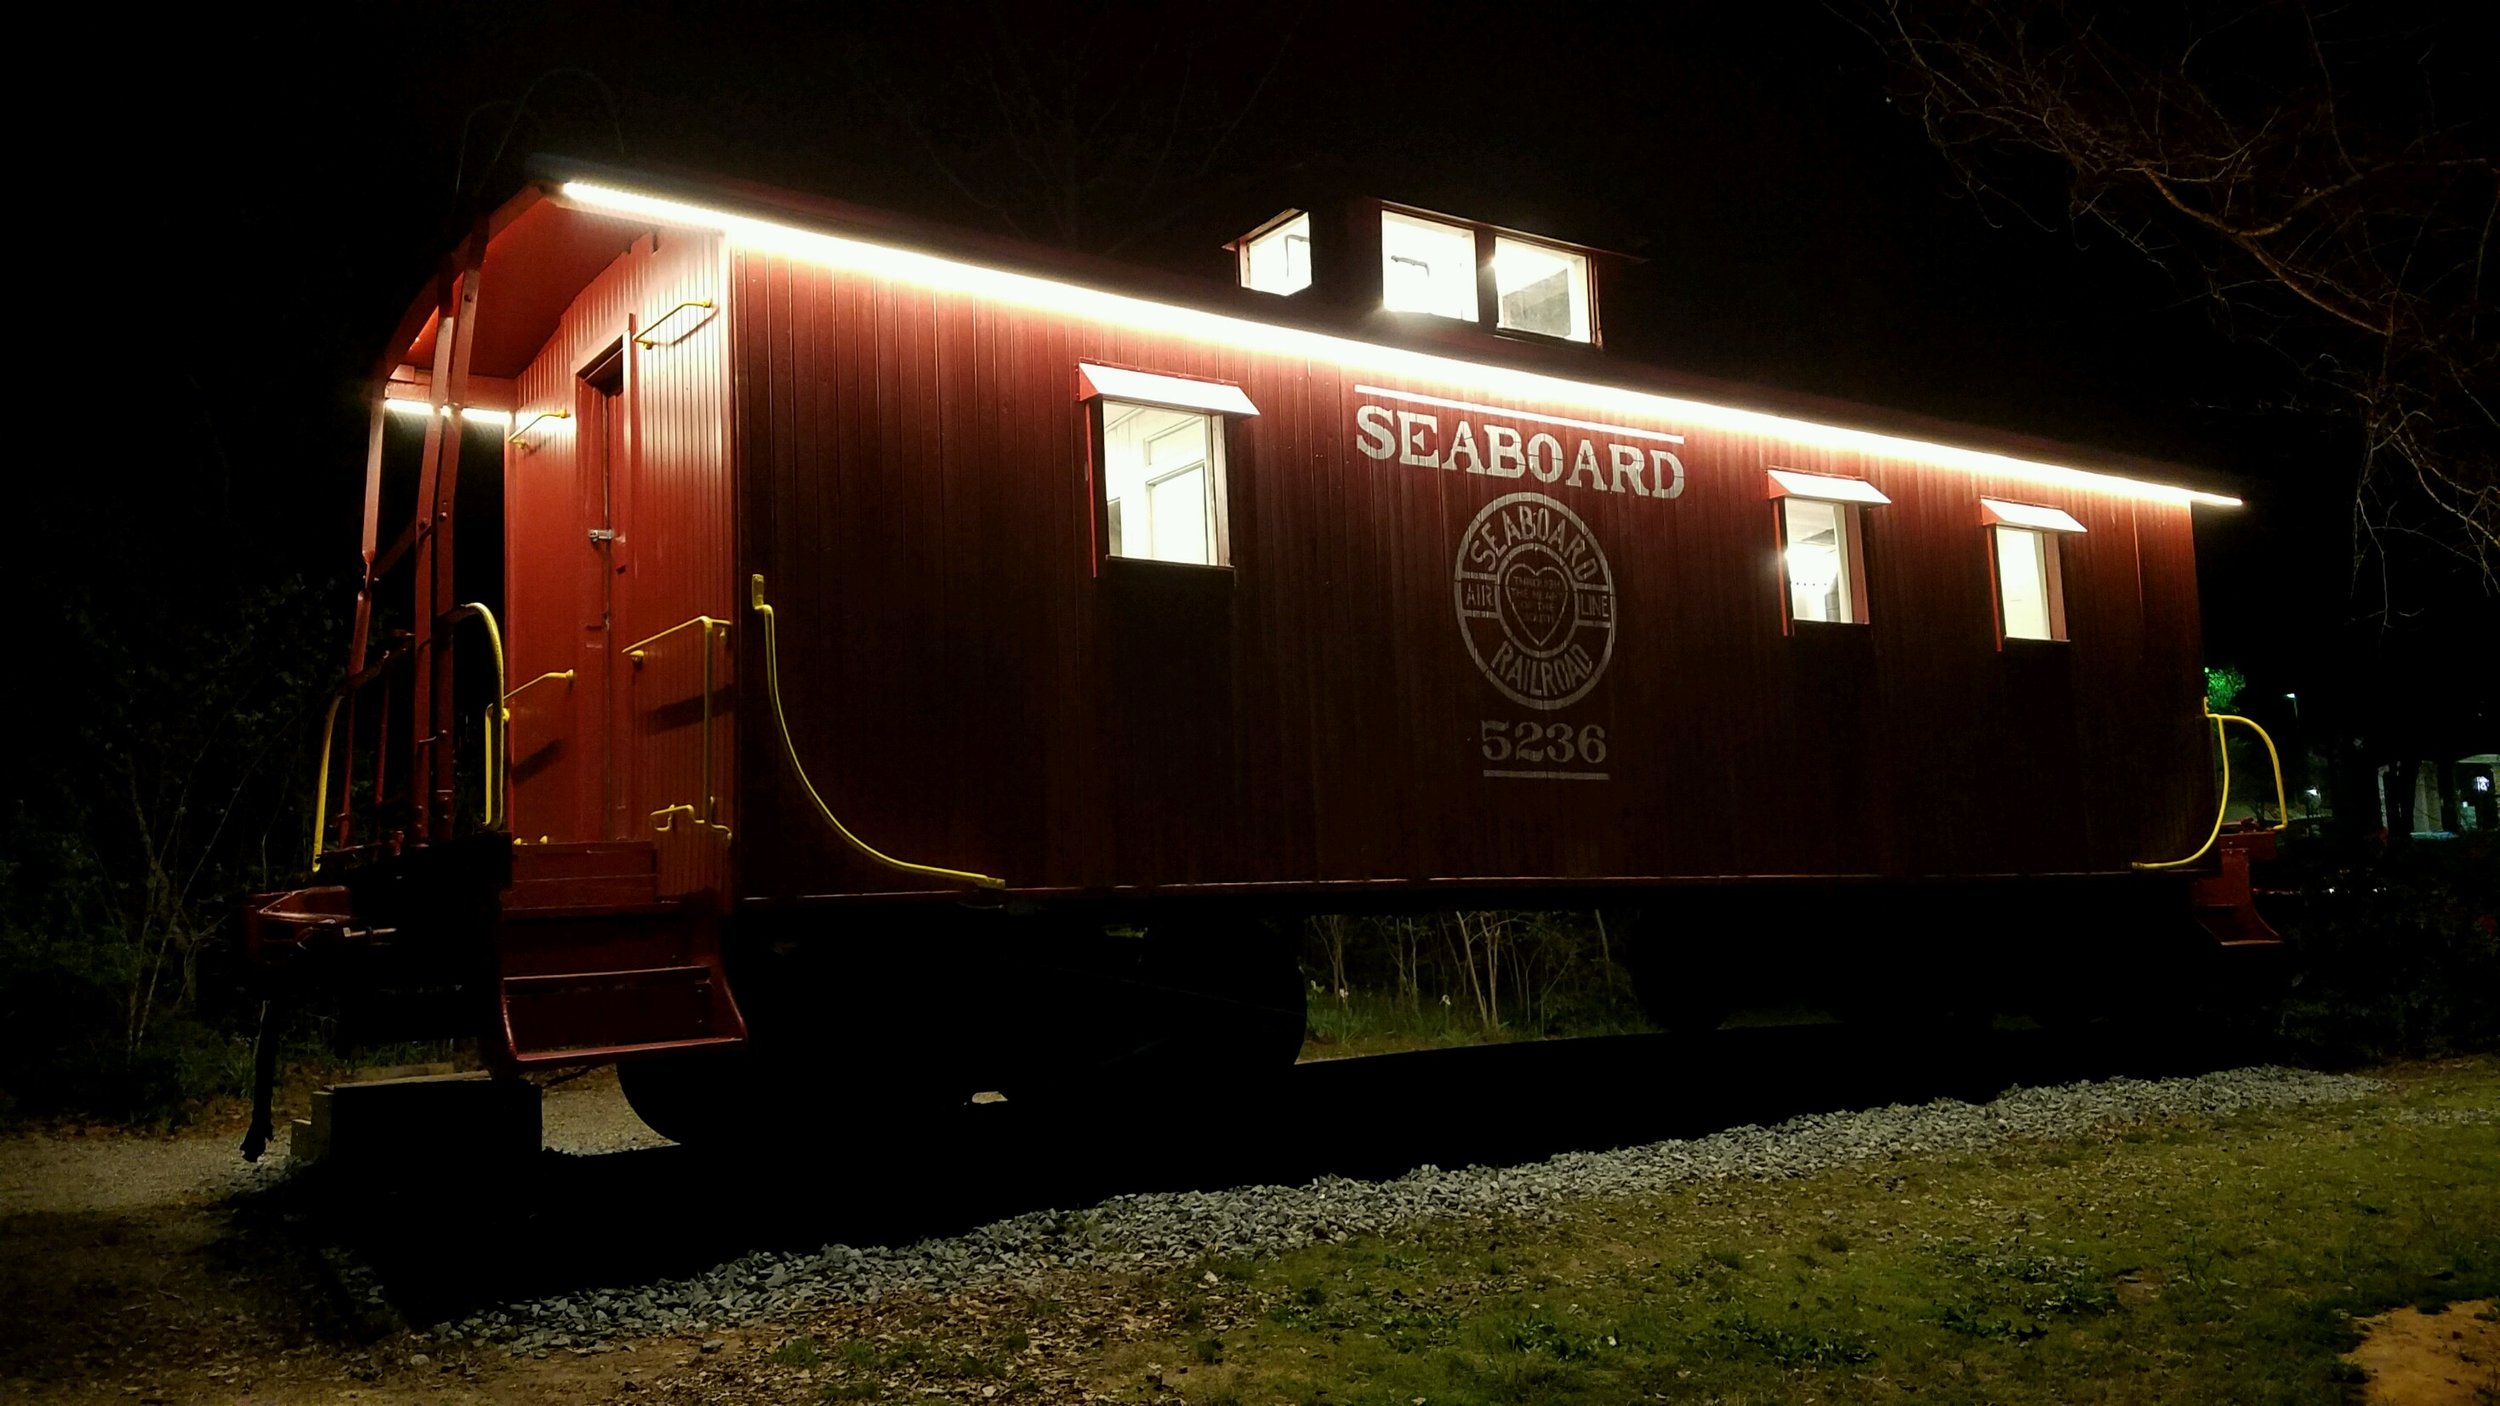 The Museum of Arts and Sciences' Award Winning Caboose Restoration